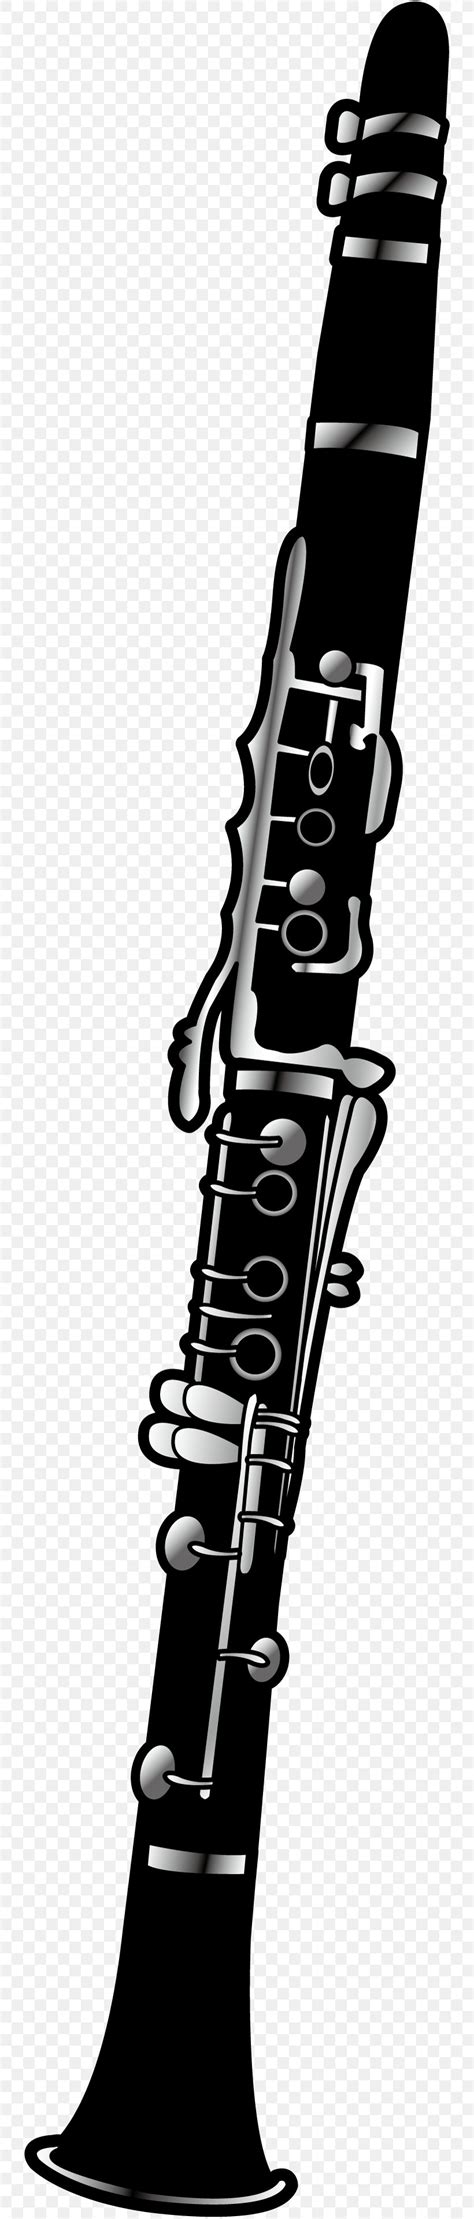 Clarinet Illustration Vector Graphics Image Music Png 739x3840px